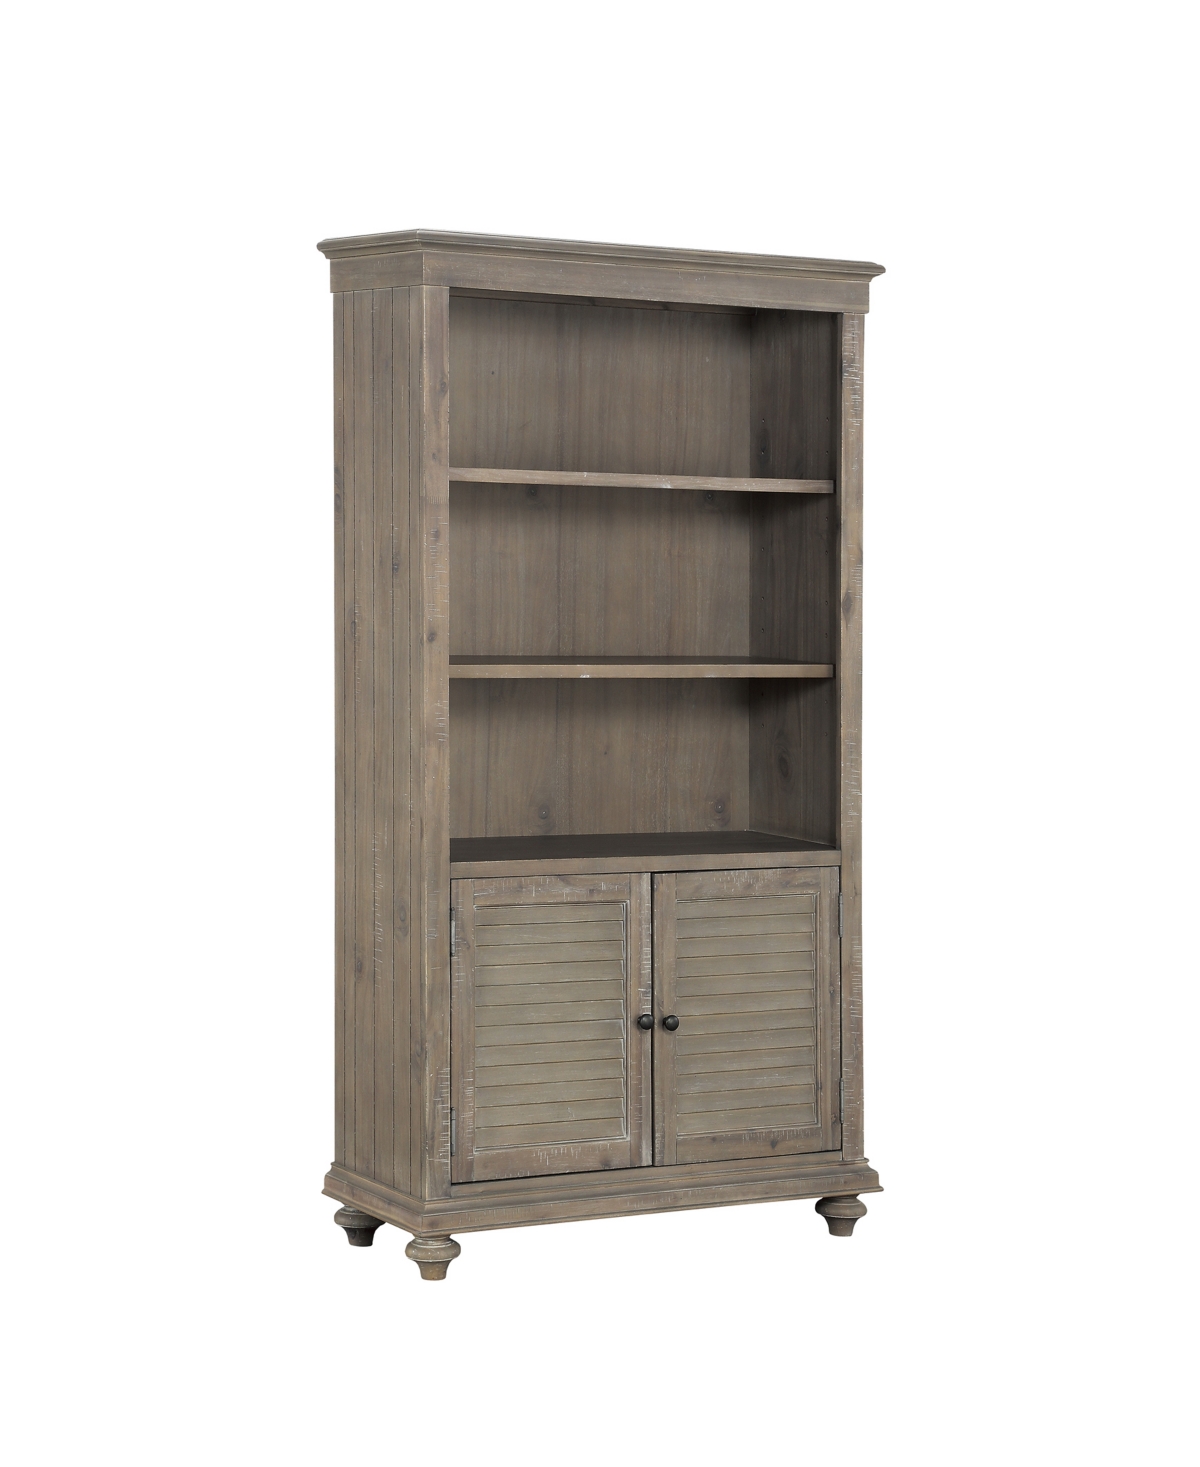 Furniture Seldovia Bookcase In Driftwood Light Brown